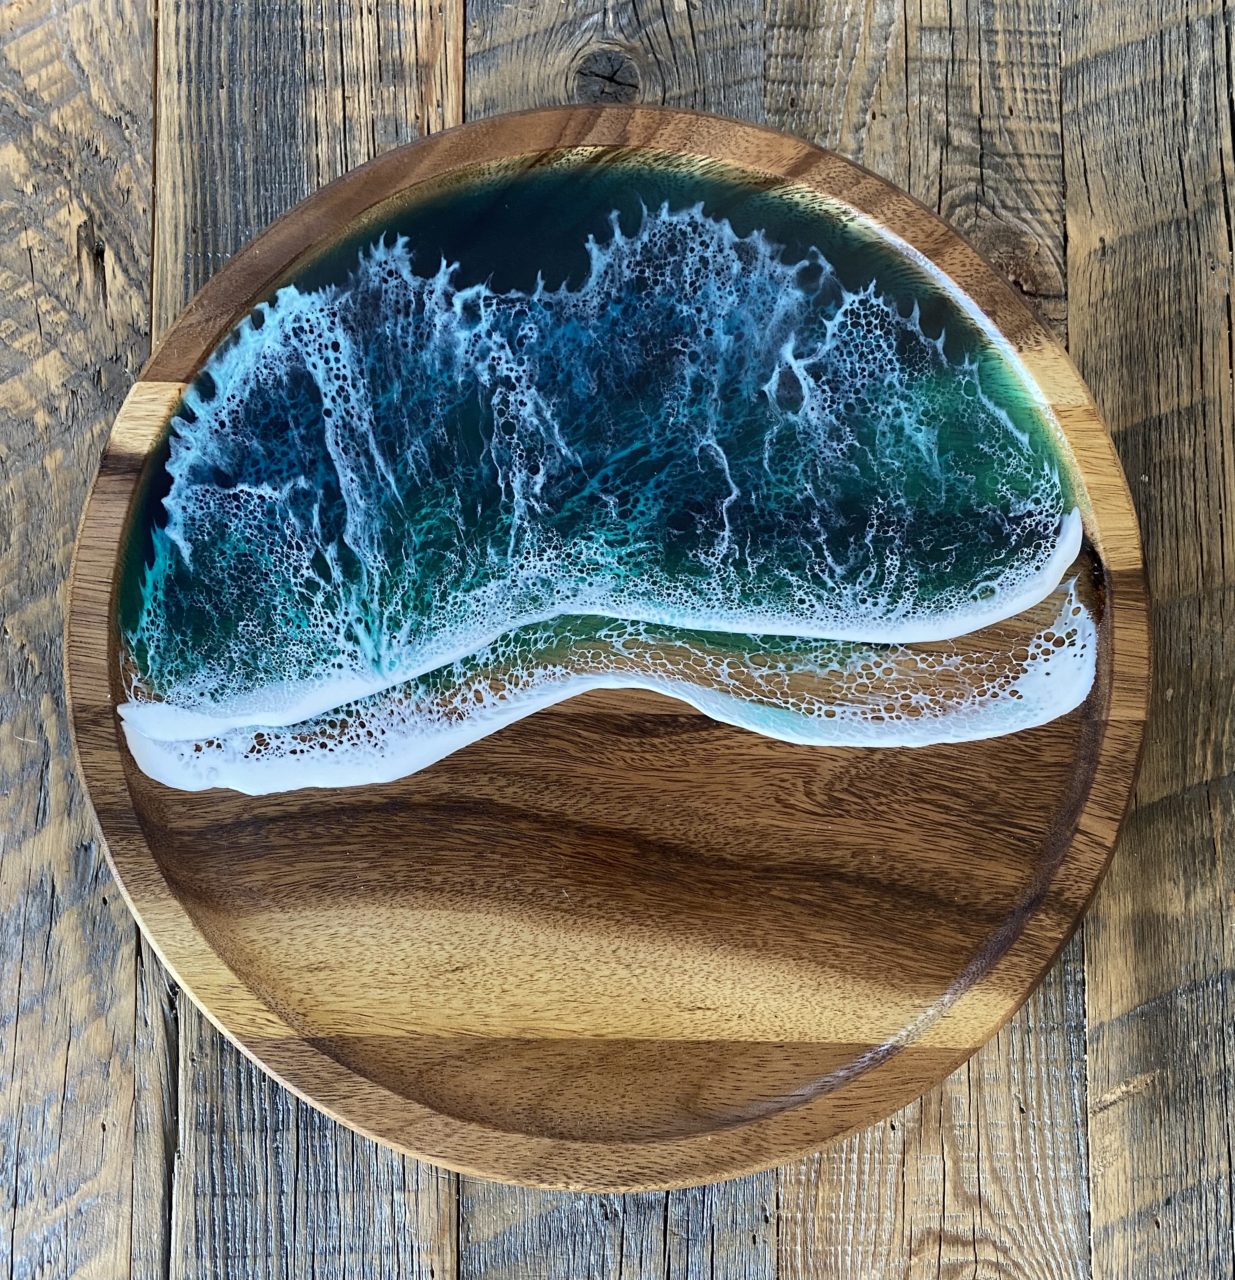 JANUARY 27th SATURDAY 1:00 - EPOXY RESIN OCEAN PROJECTS - MAKE ANY FRAMED  DESIGN